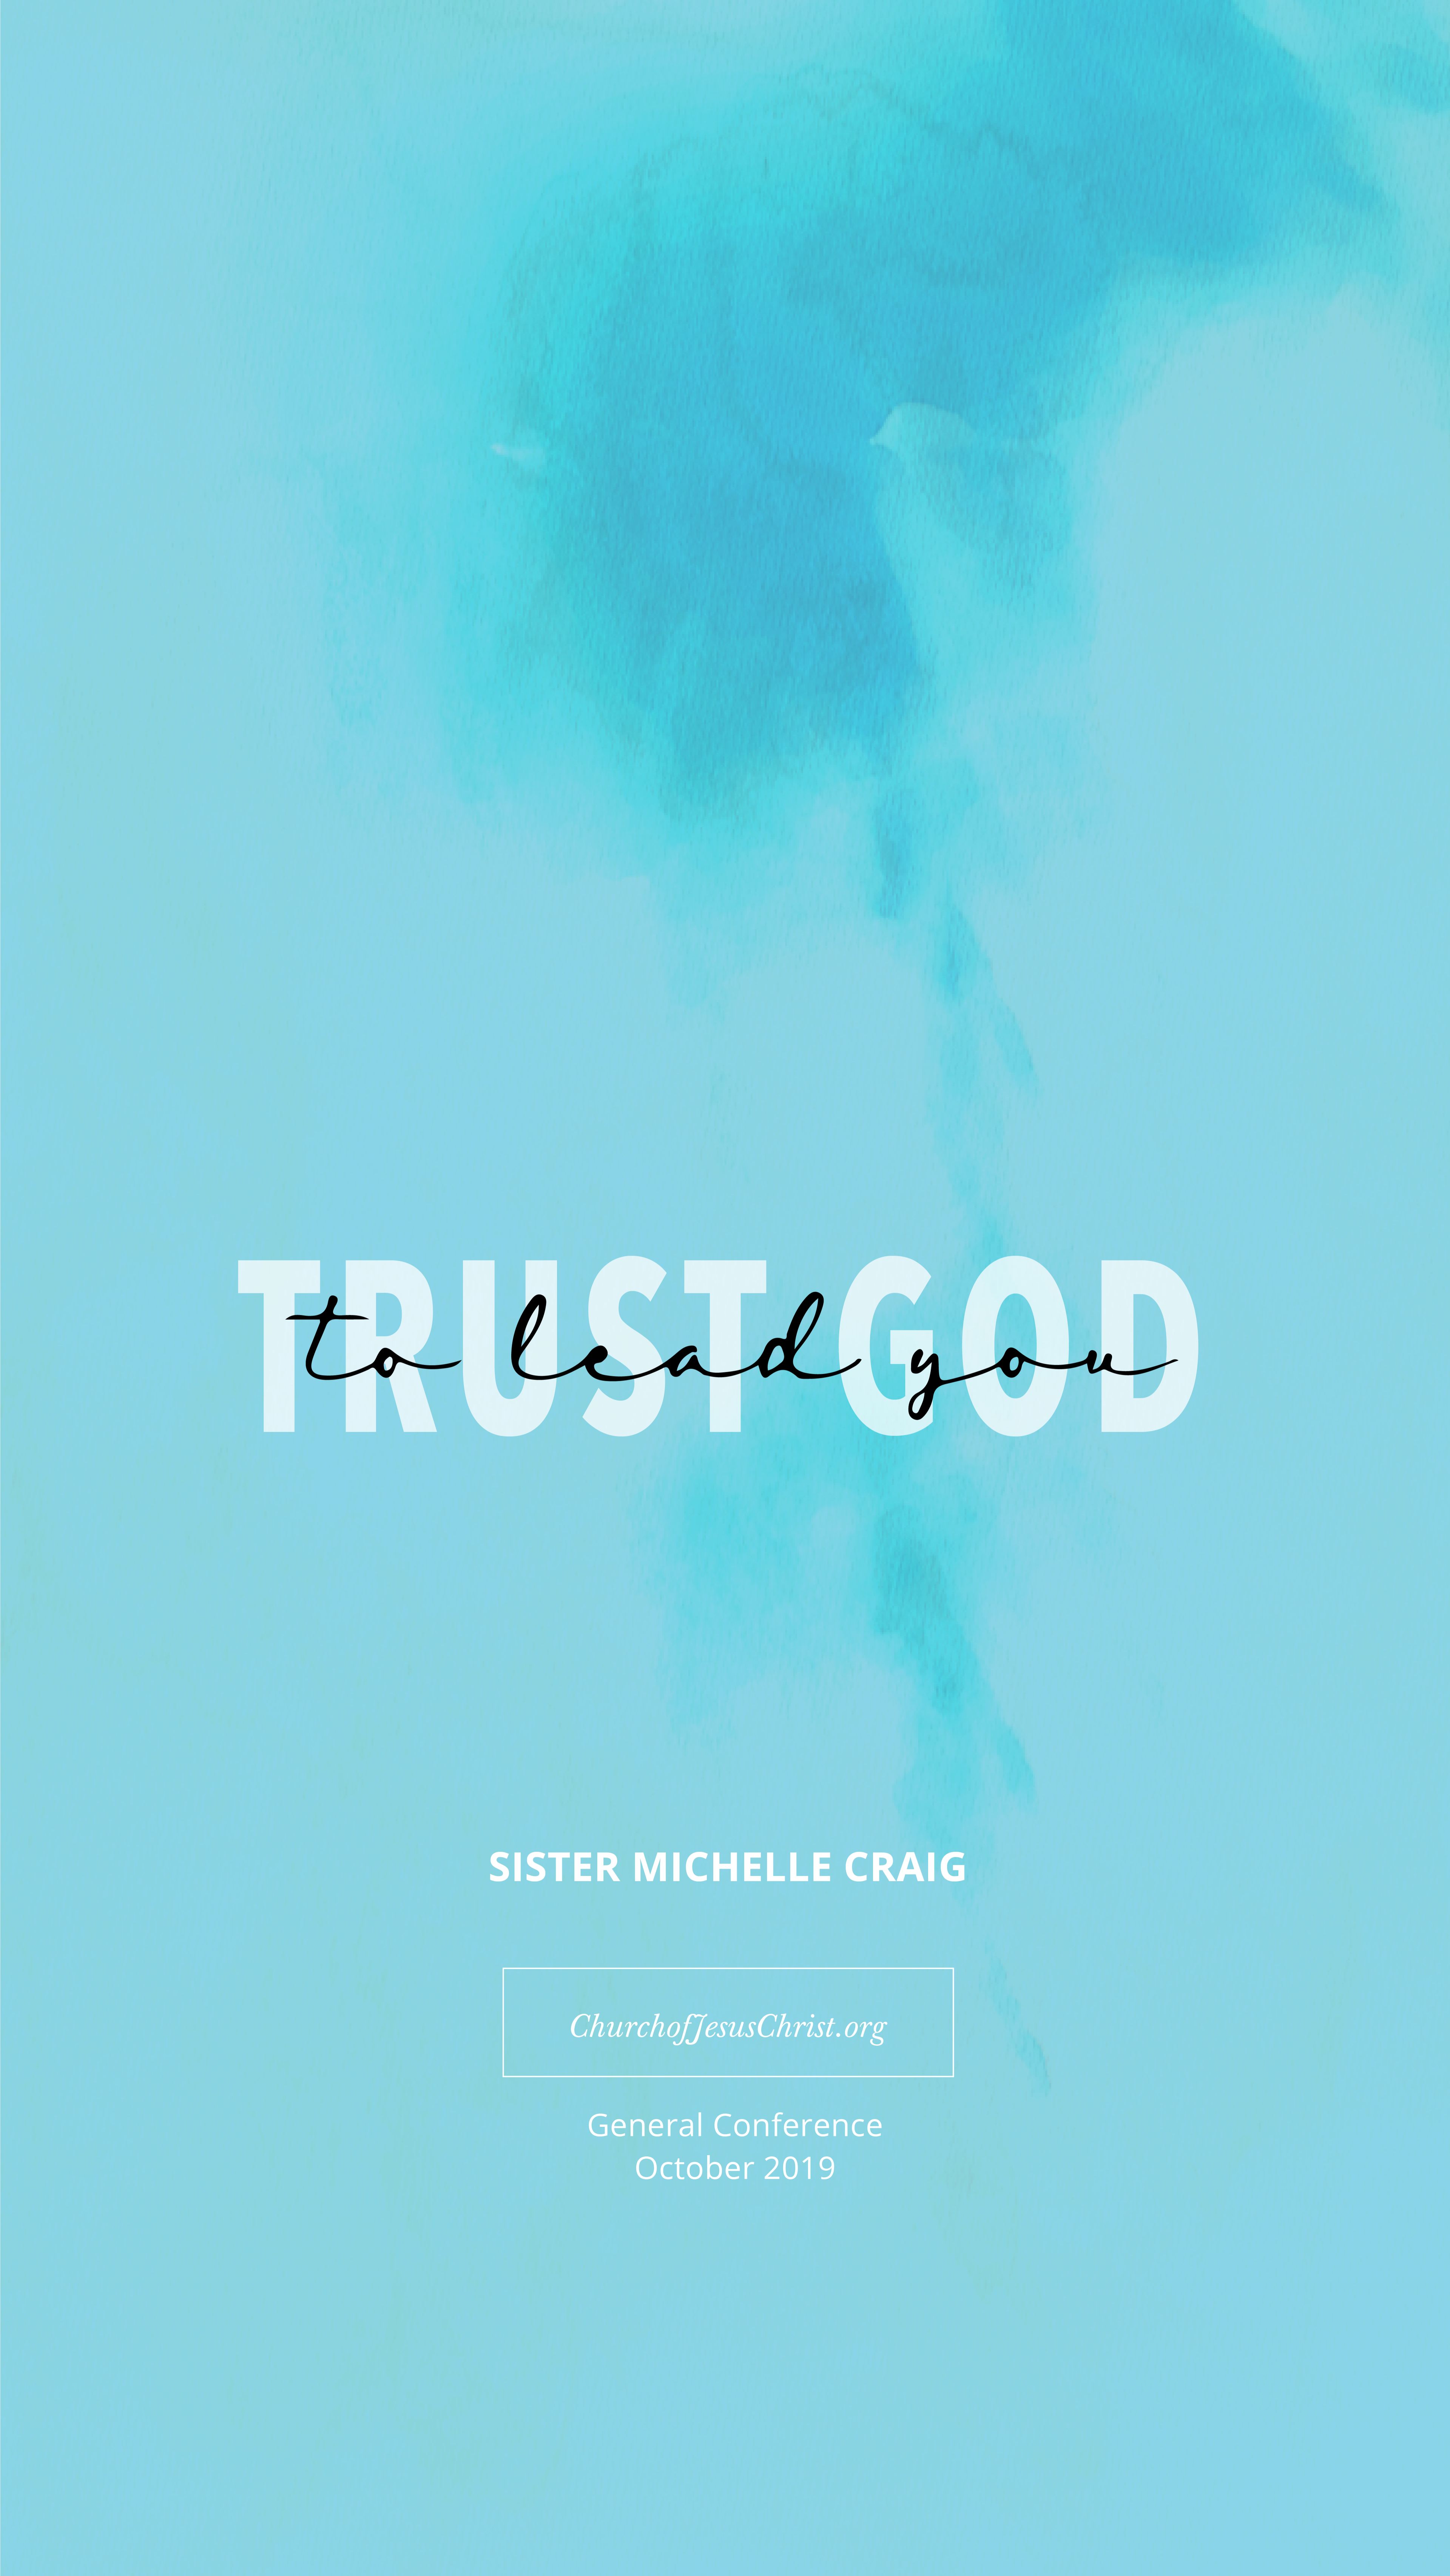 “Trust God to lead you.”—Michelle Craig